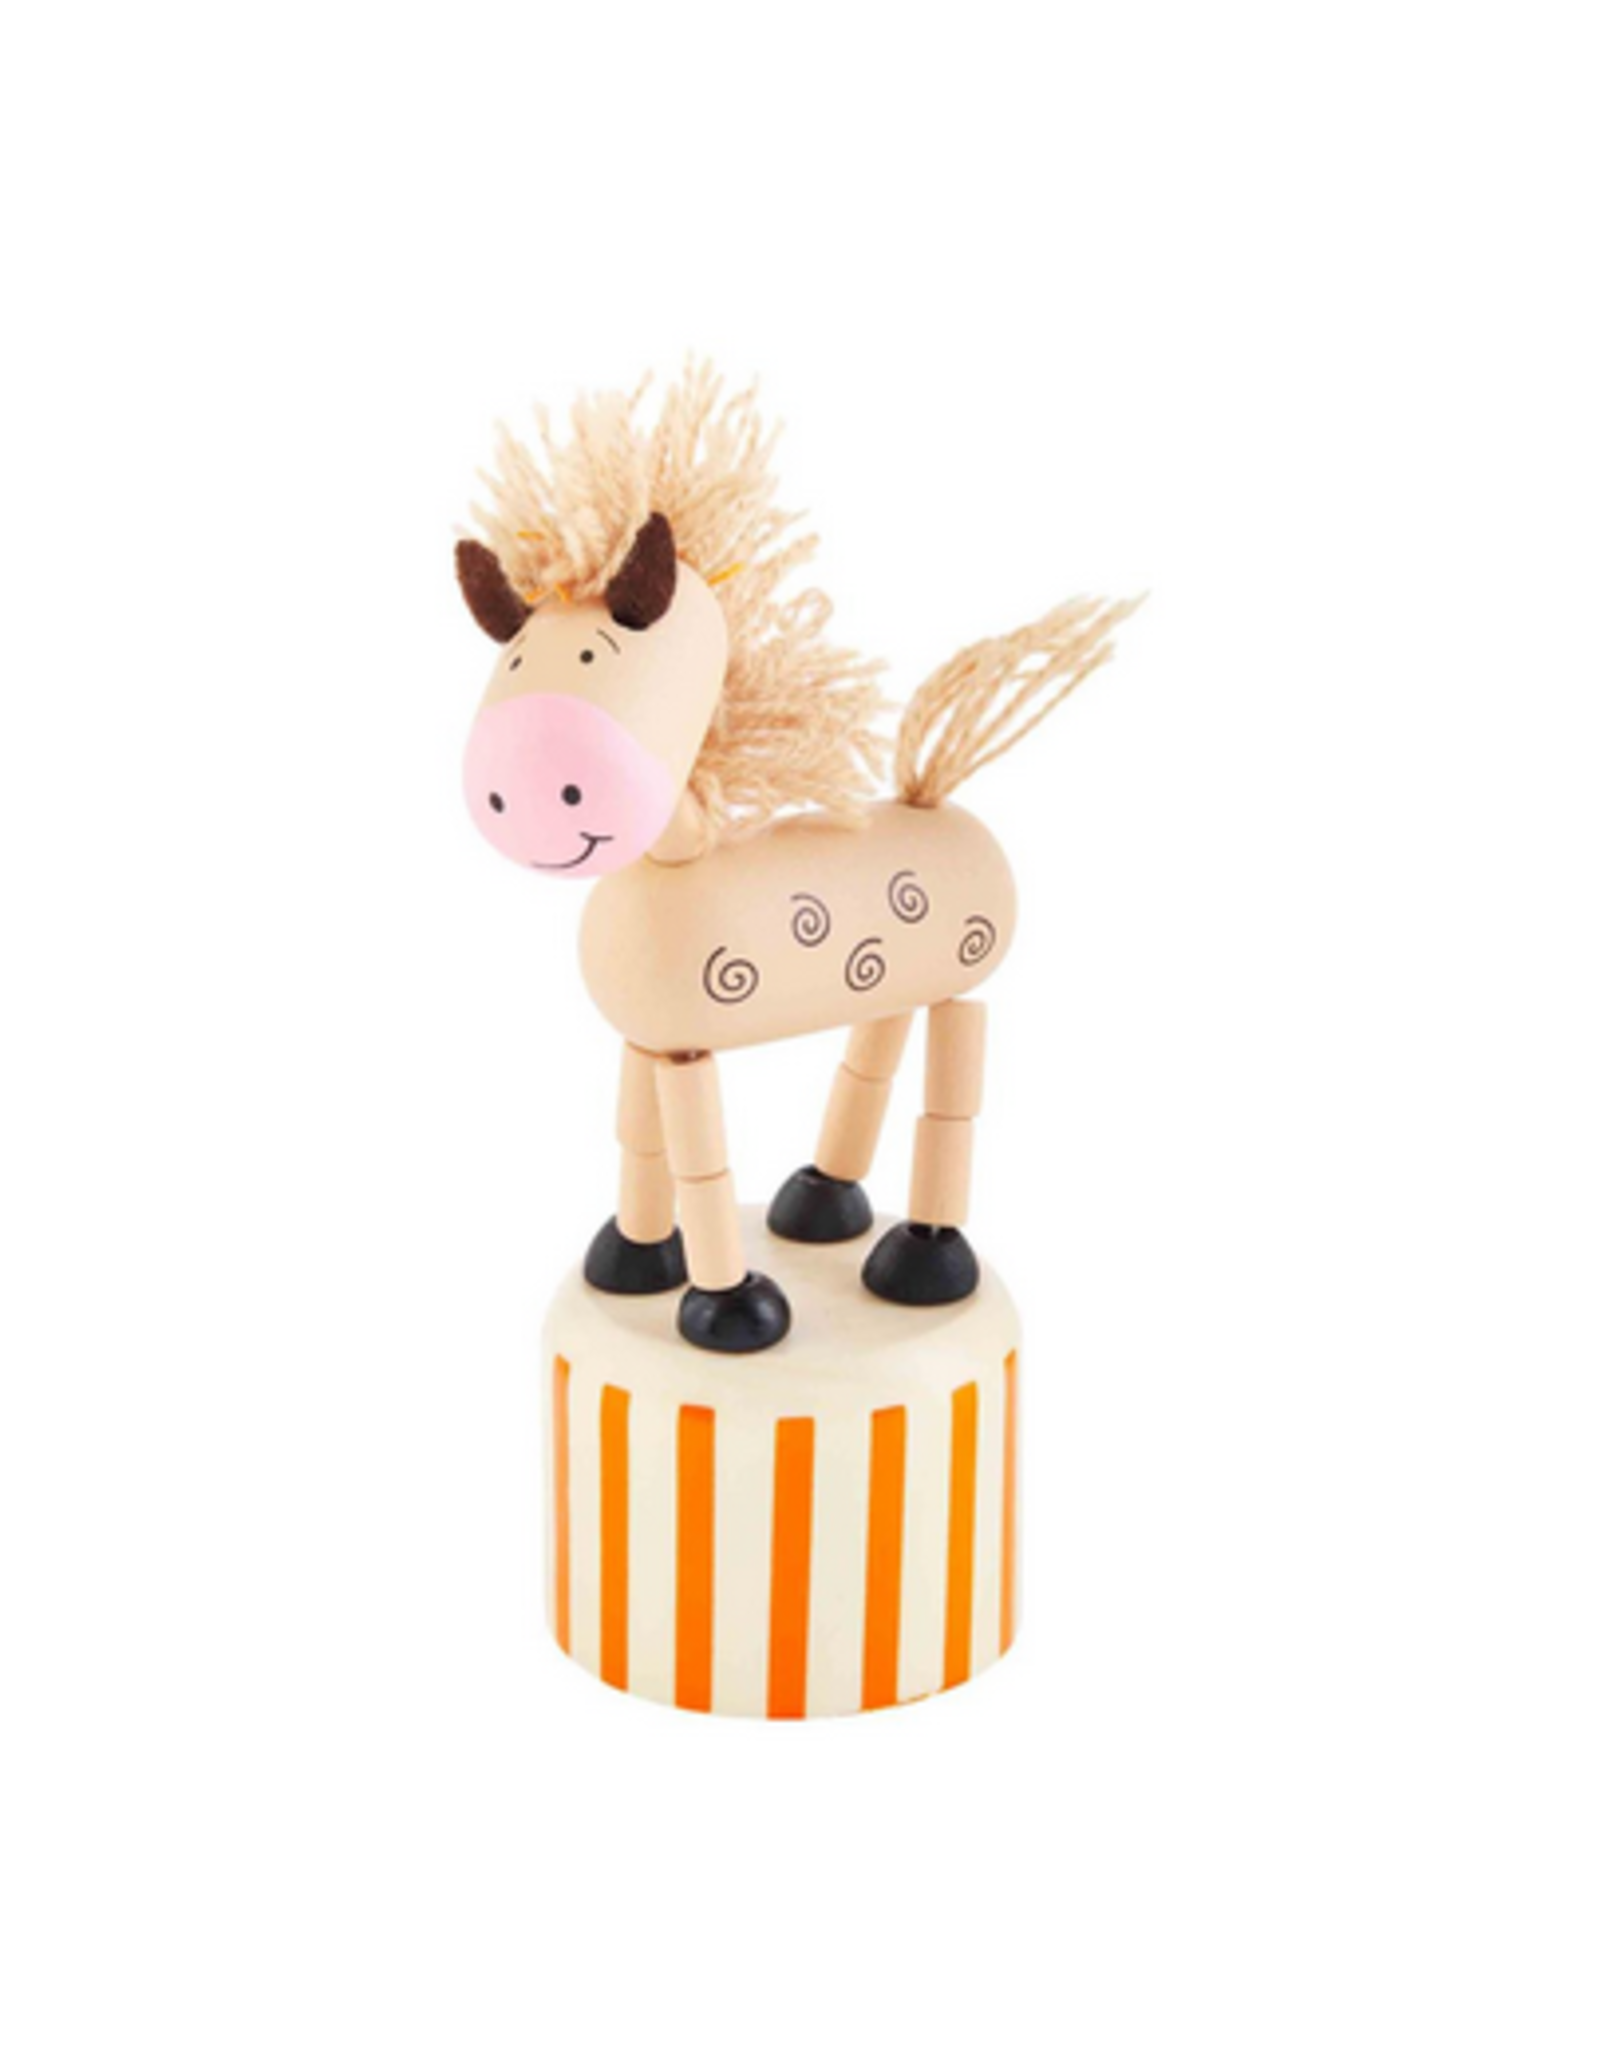 Mudpie Collapsible Wood Toy-Horse